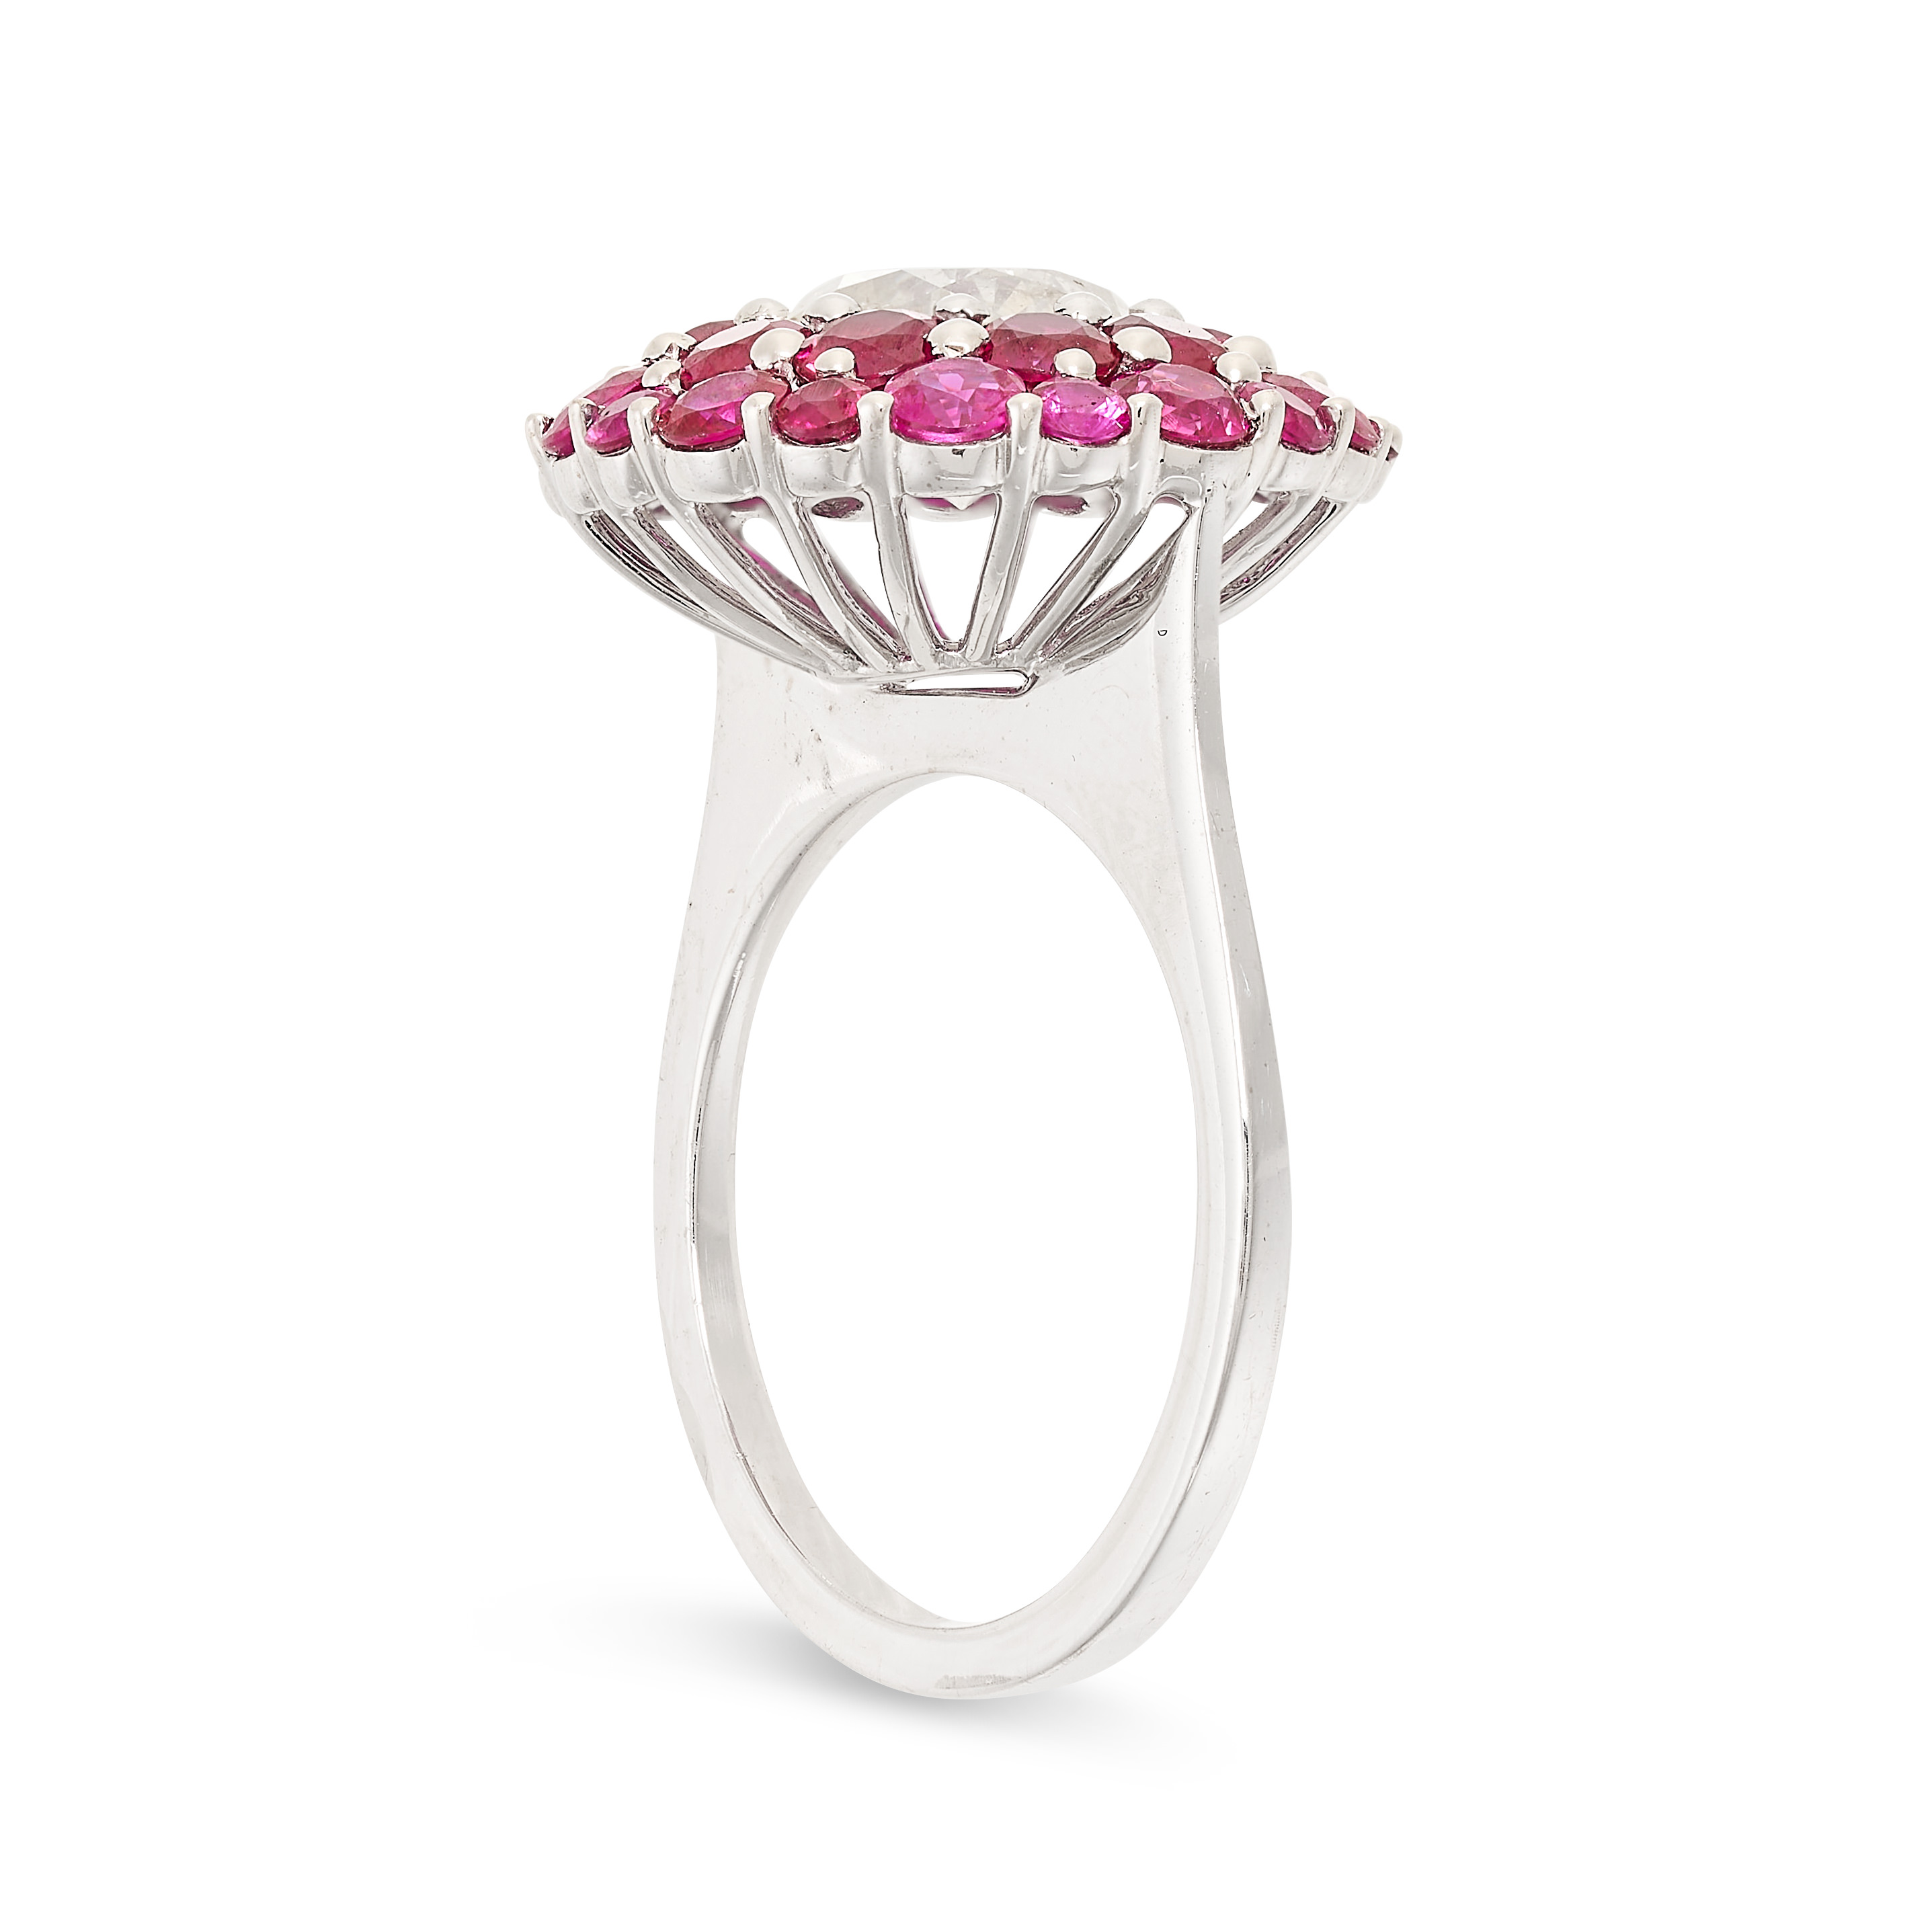 A RUBY AND DIAMOND CLUSTER RING in 18ct white gold, set with a central round brilliant cut diamond - Image 2 of 2